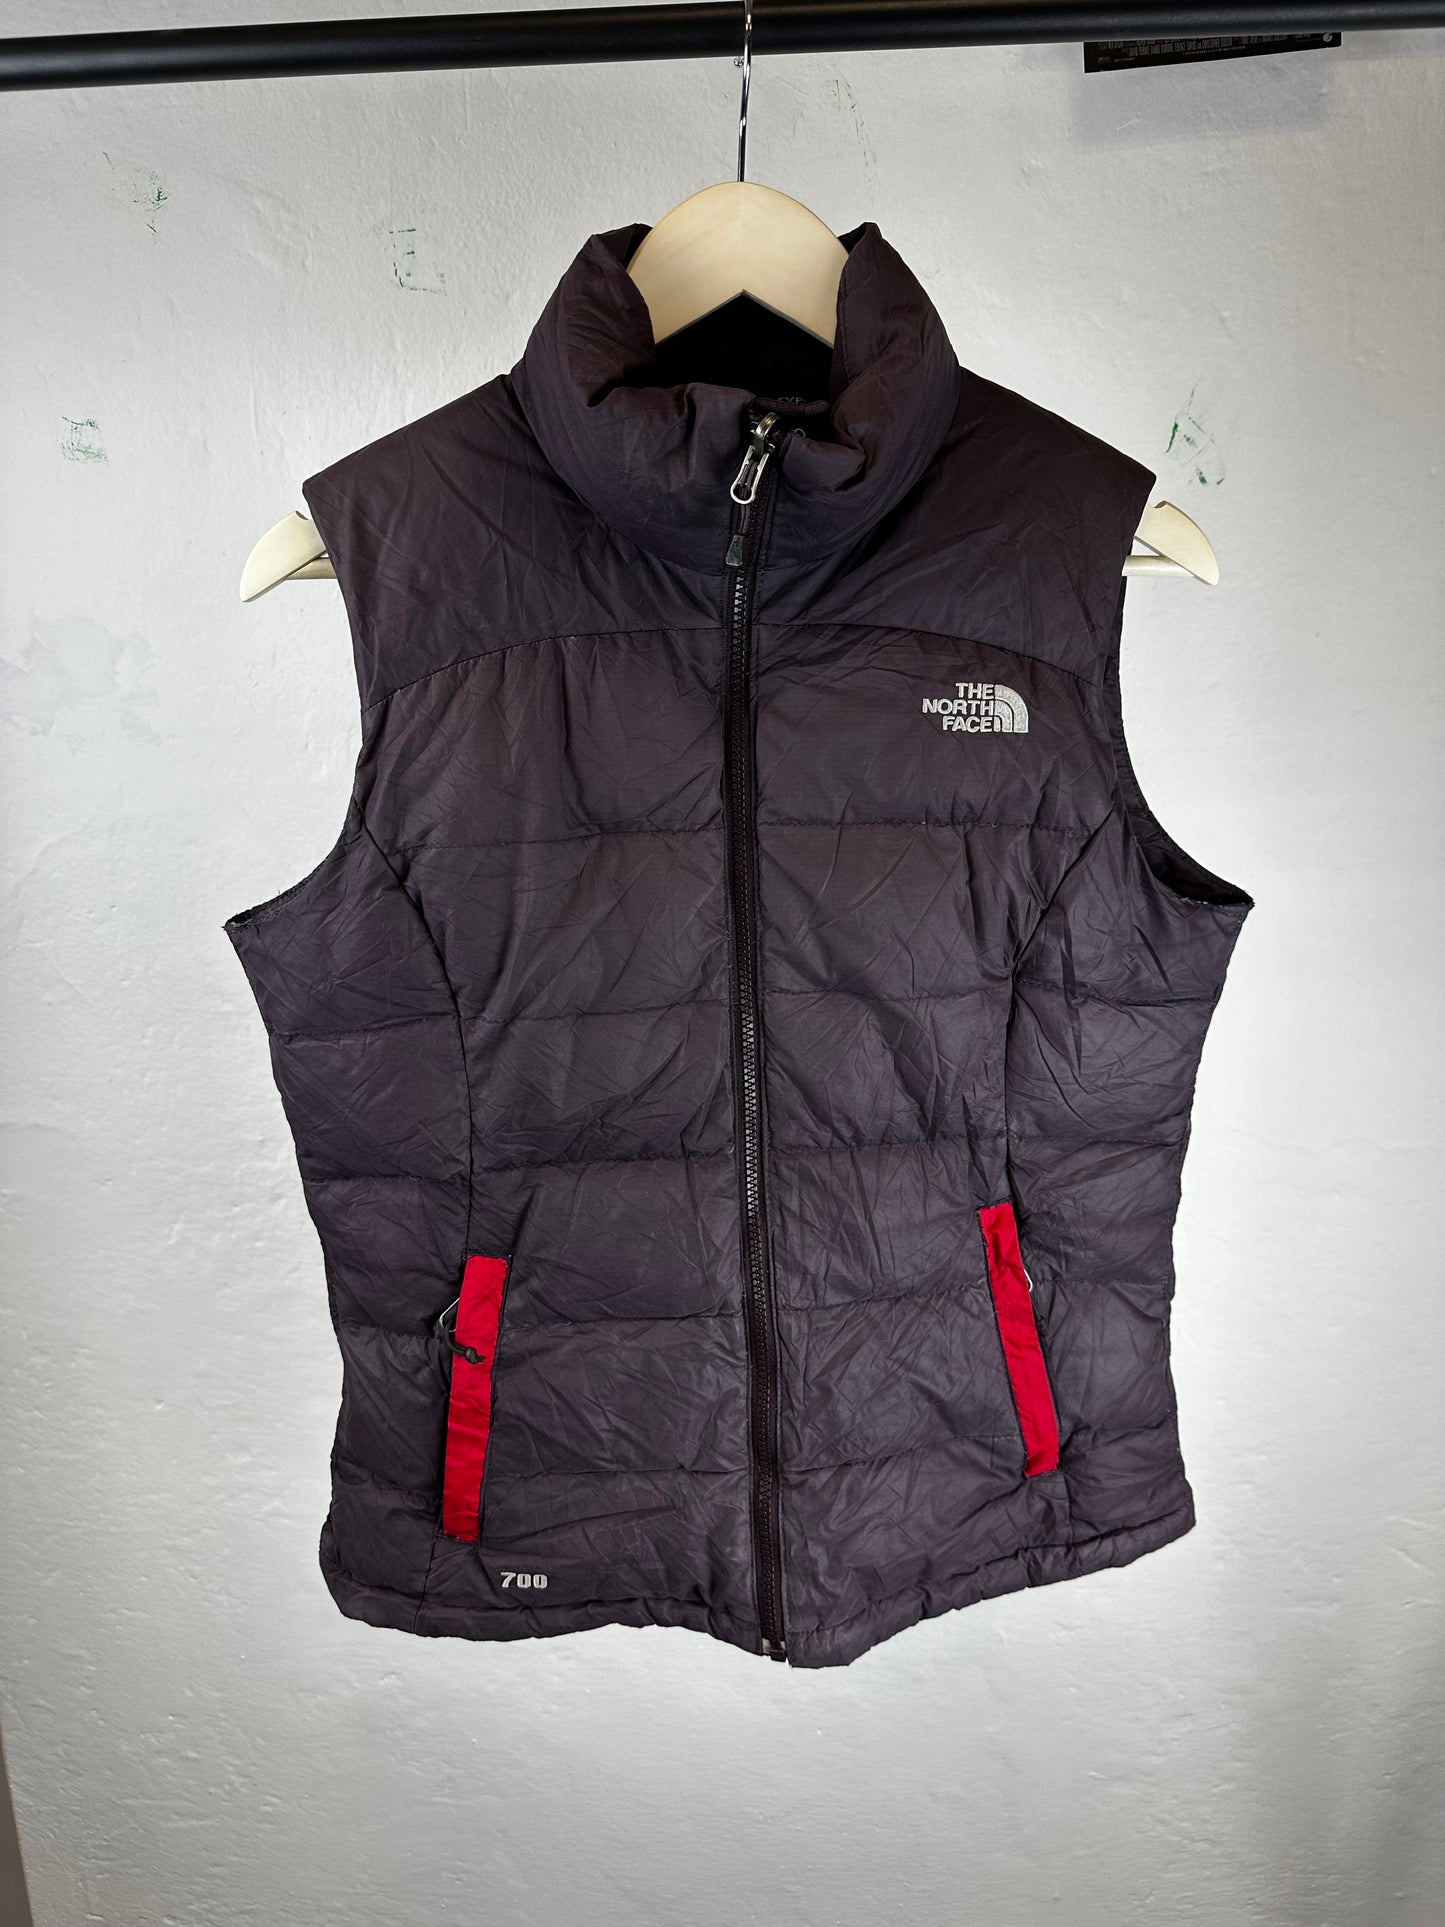 North Face Puffer Vest - size S (WMN)